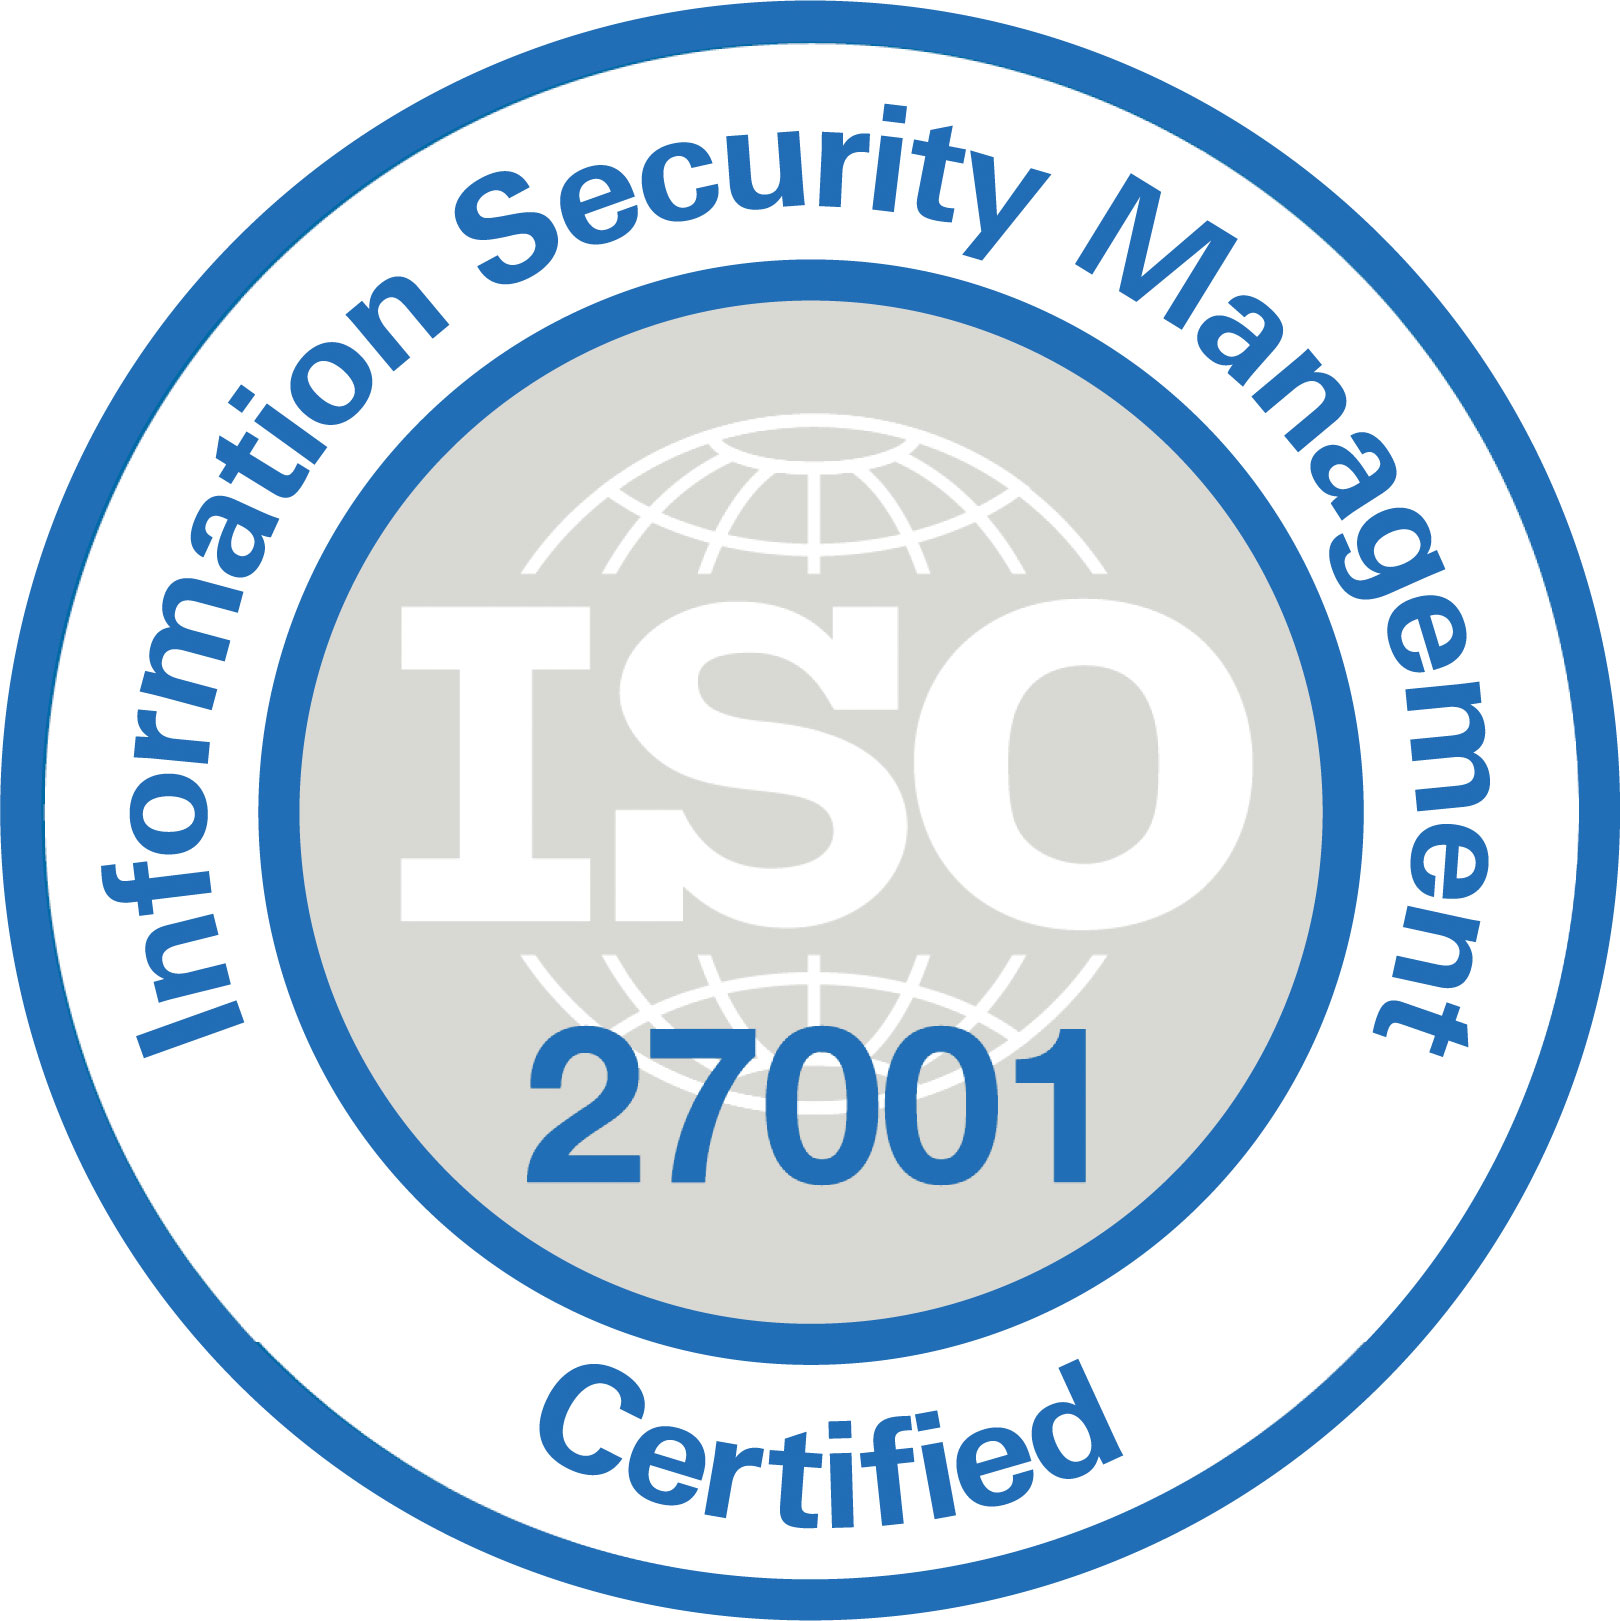 Leading Loyalty and Alternative Asset Firm PointsVille Secures ISO 27001